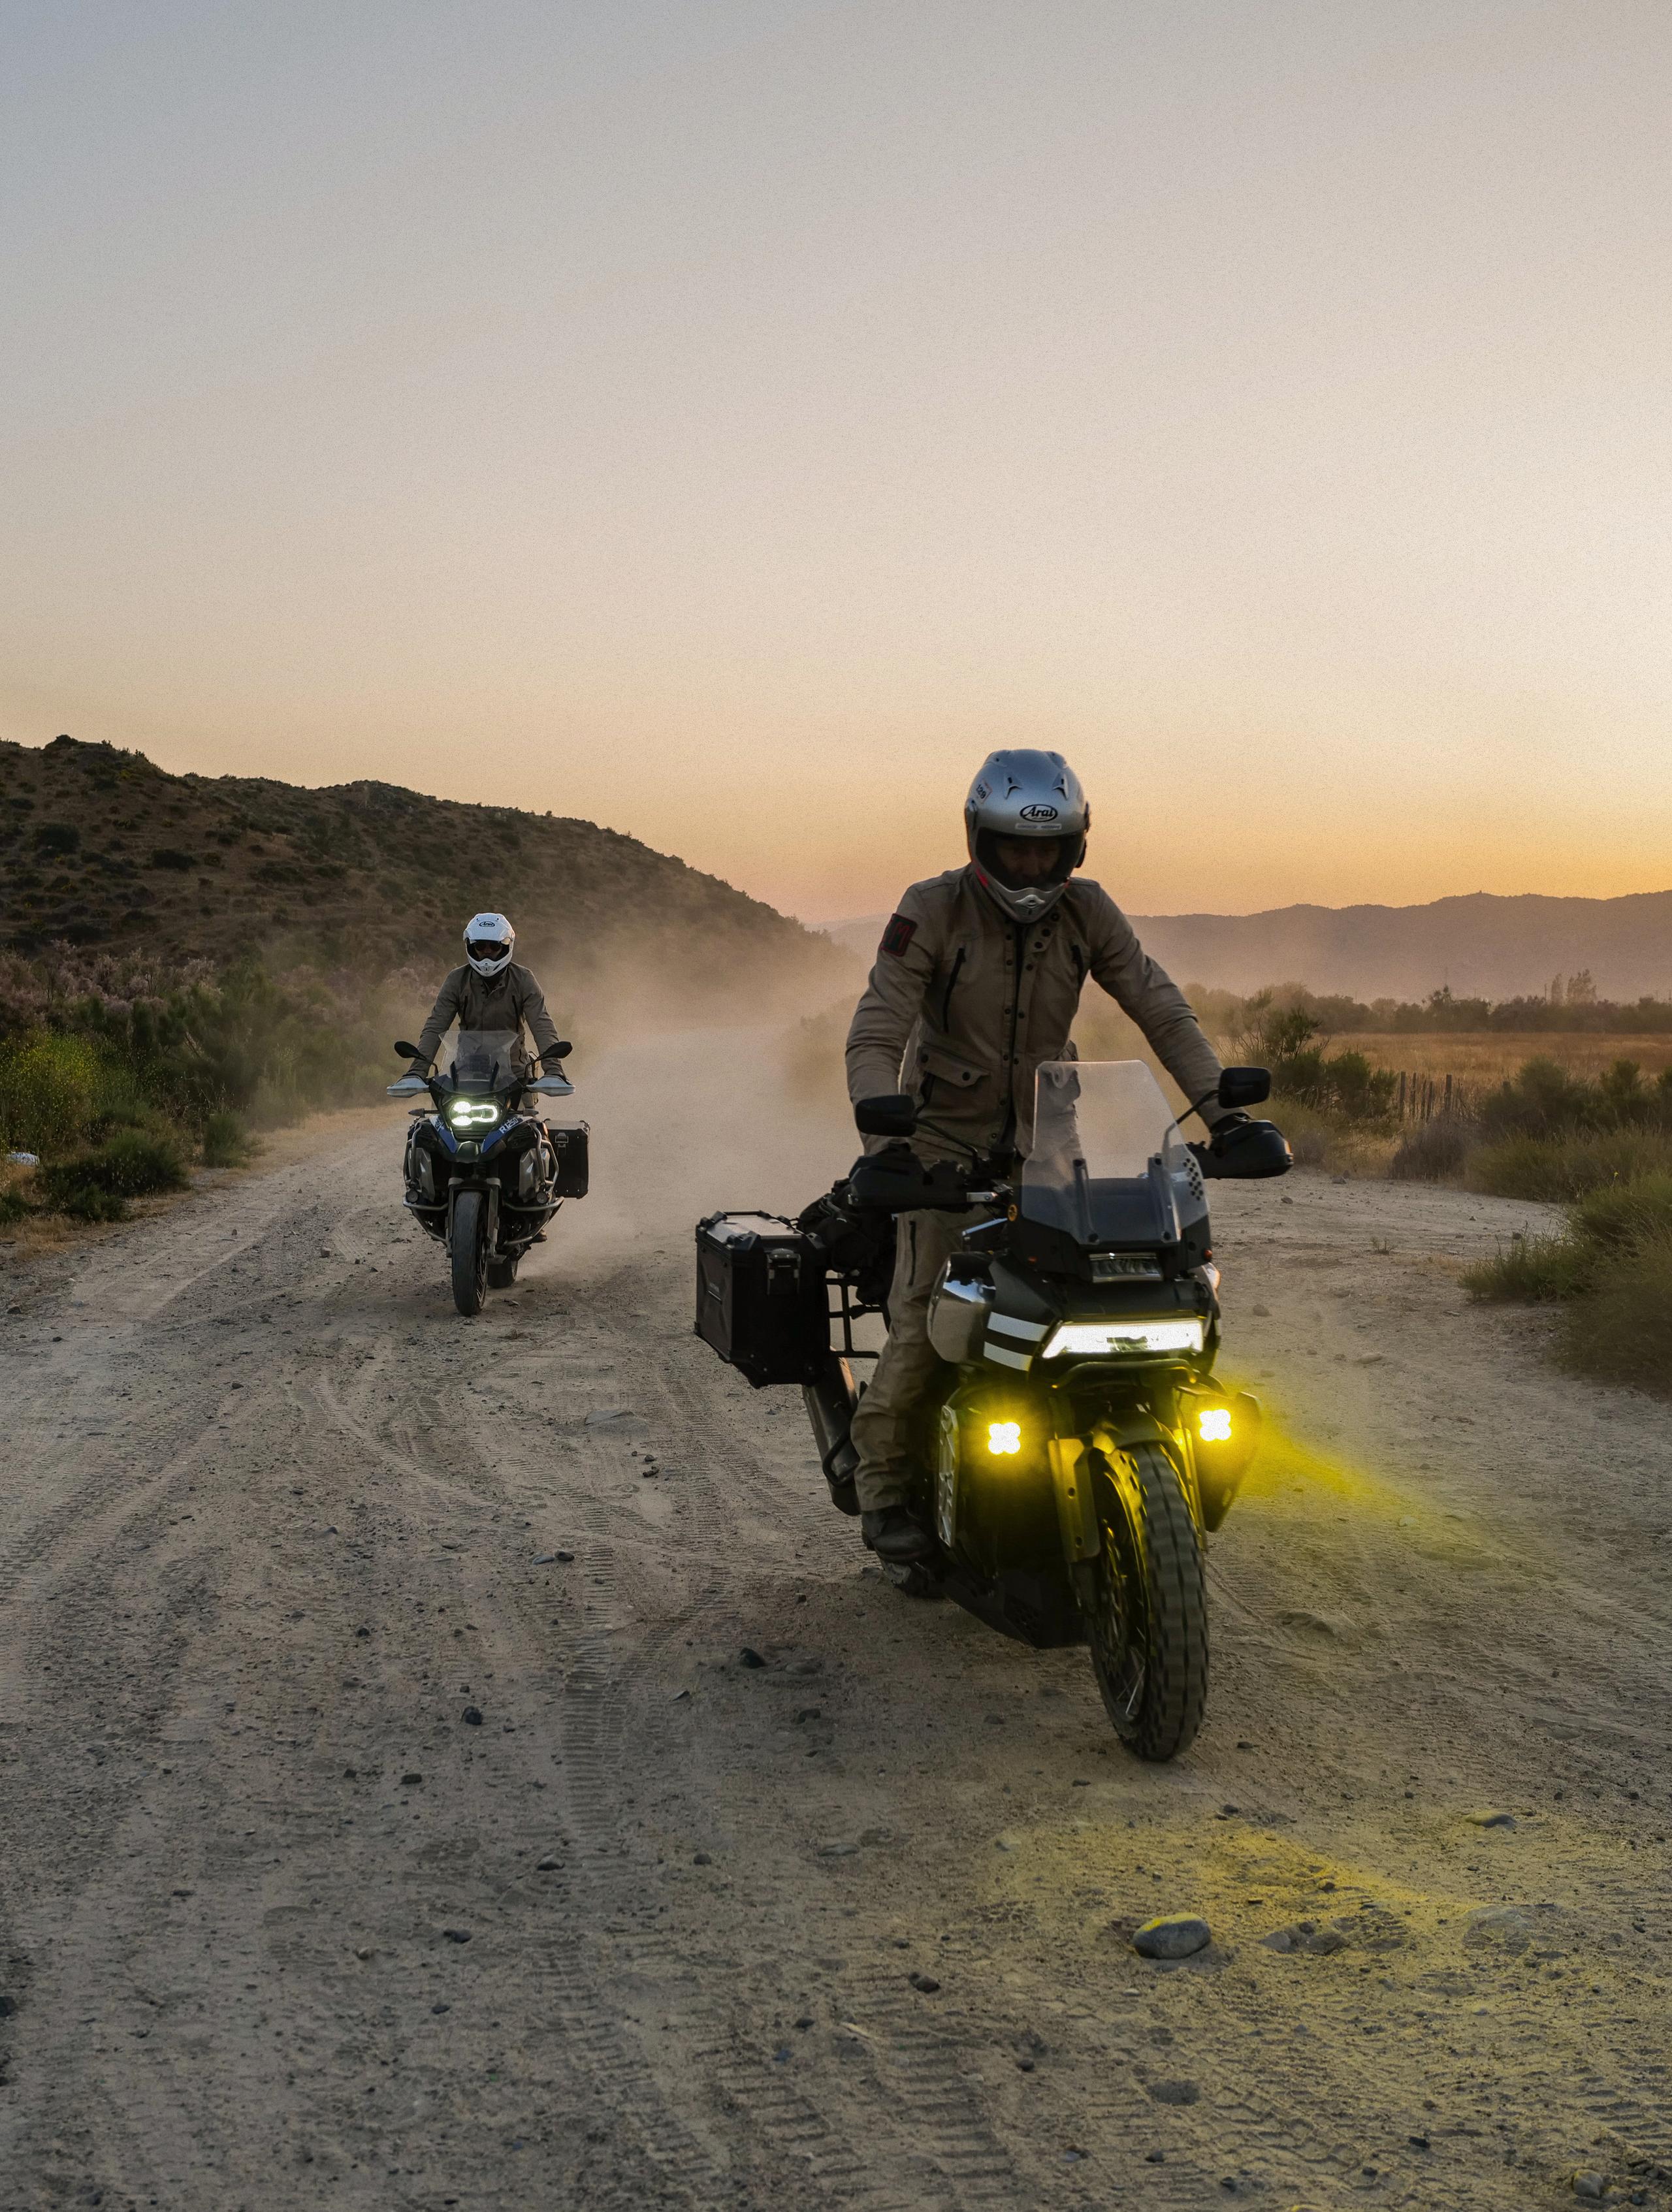 Two motorcyclists at dusk riding down dirt path in Baja California